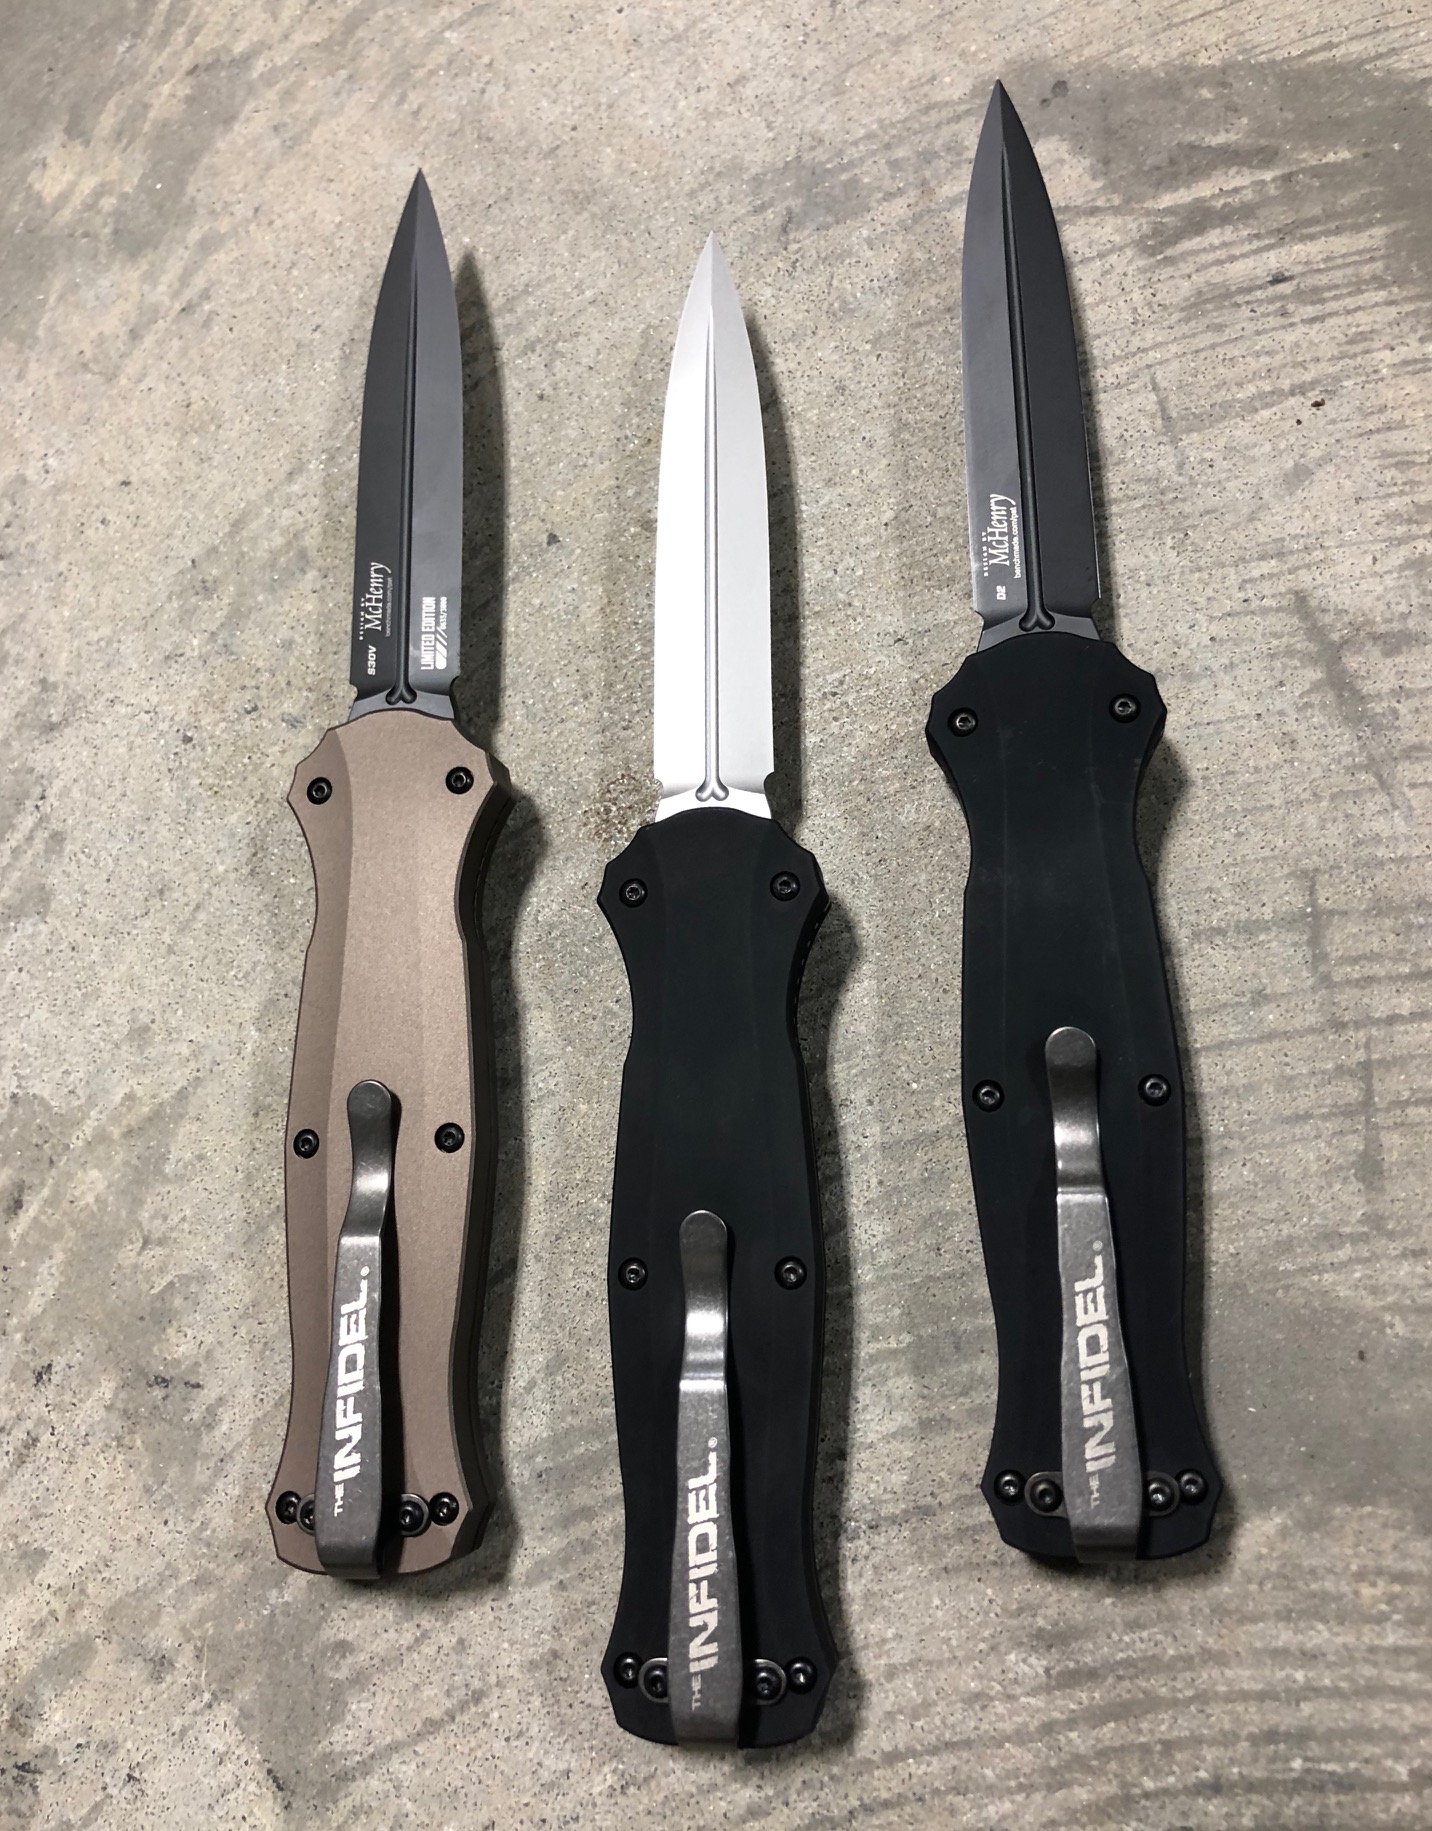 BENCHMADE INFIDEL SERIES - THE ULTIMATE IN OTF KNIVES